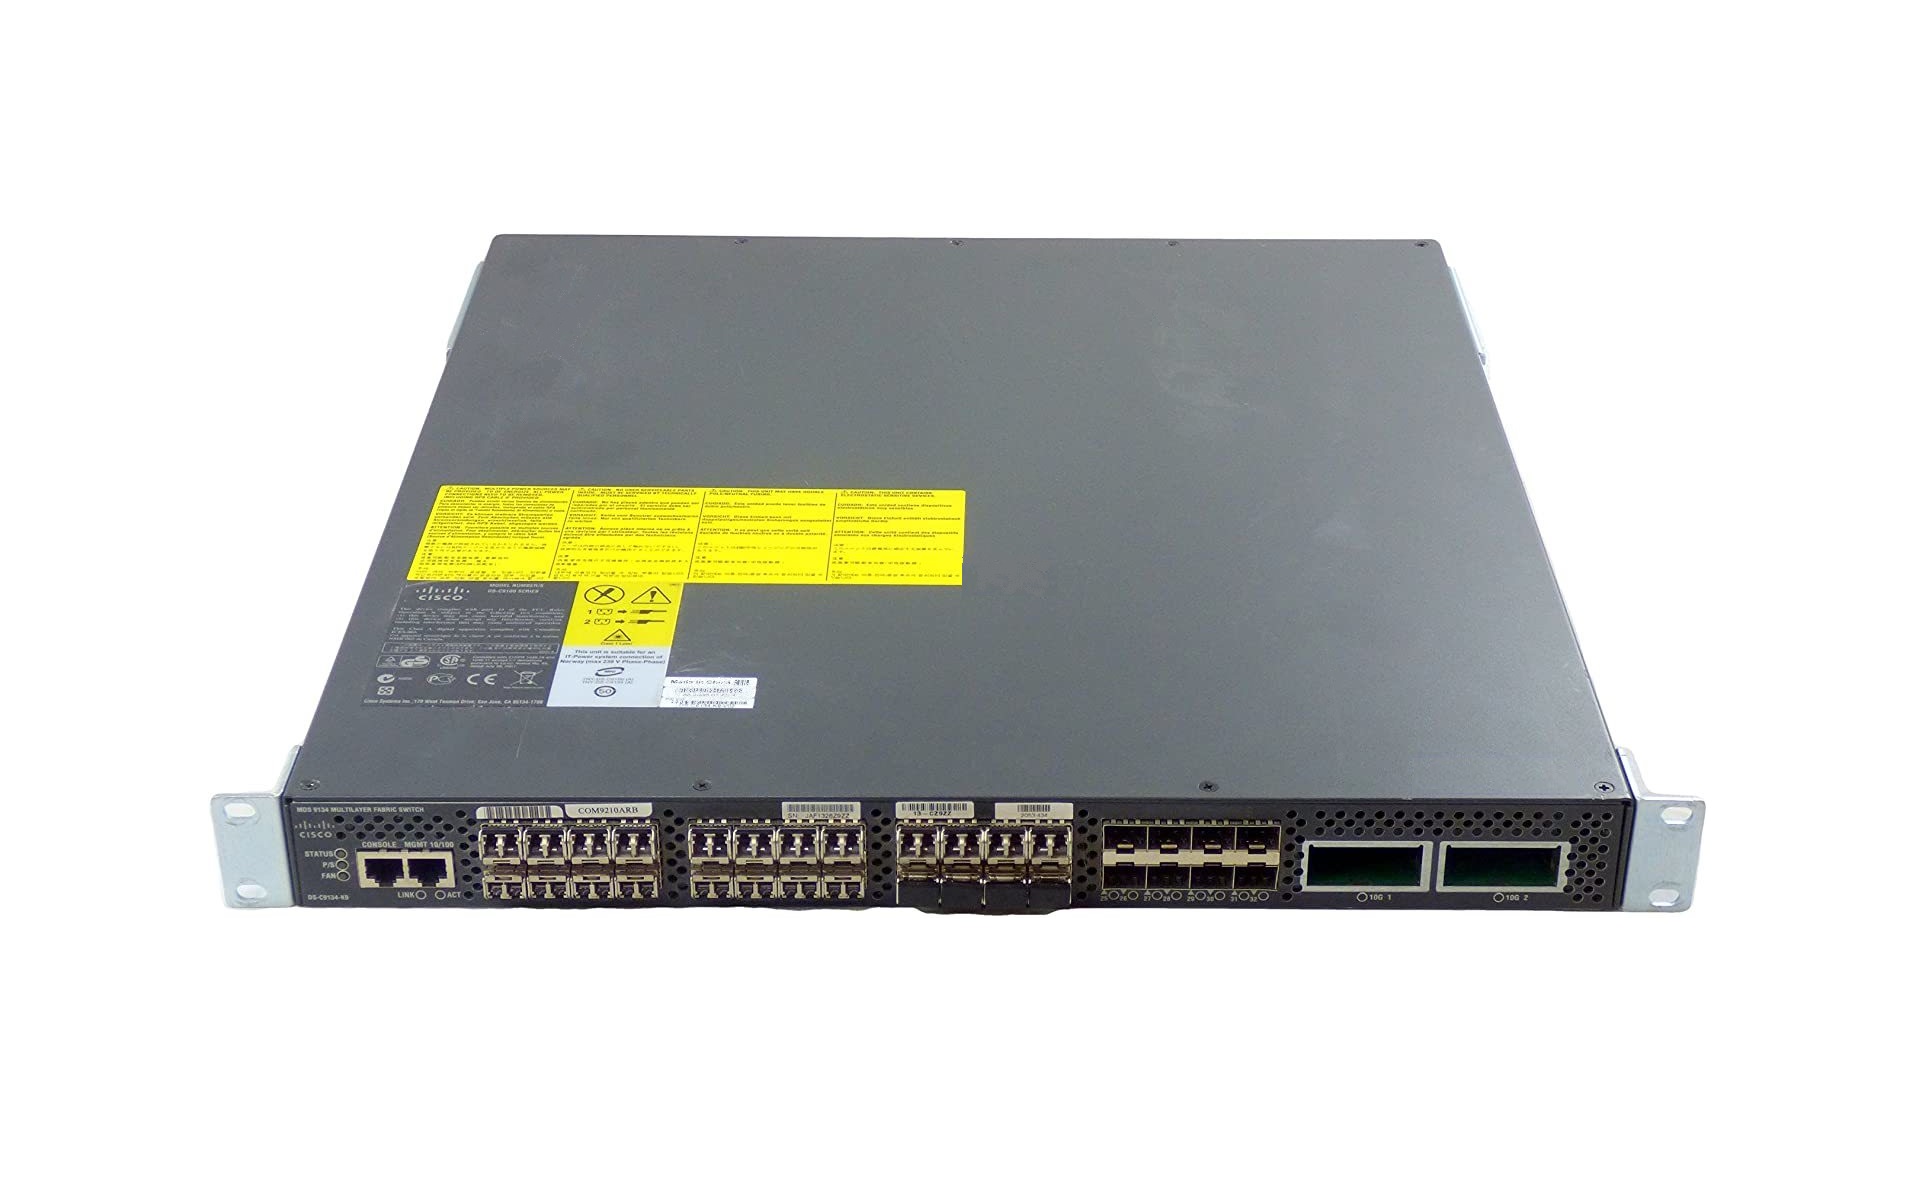 Cisco Mds 9134 34-Port Multilayer Fabric Switch